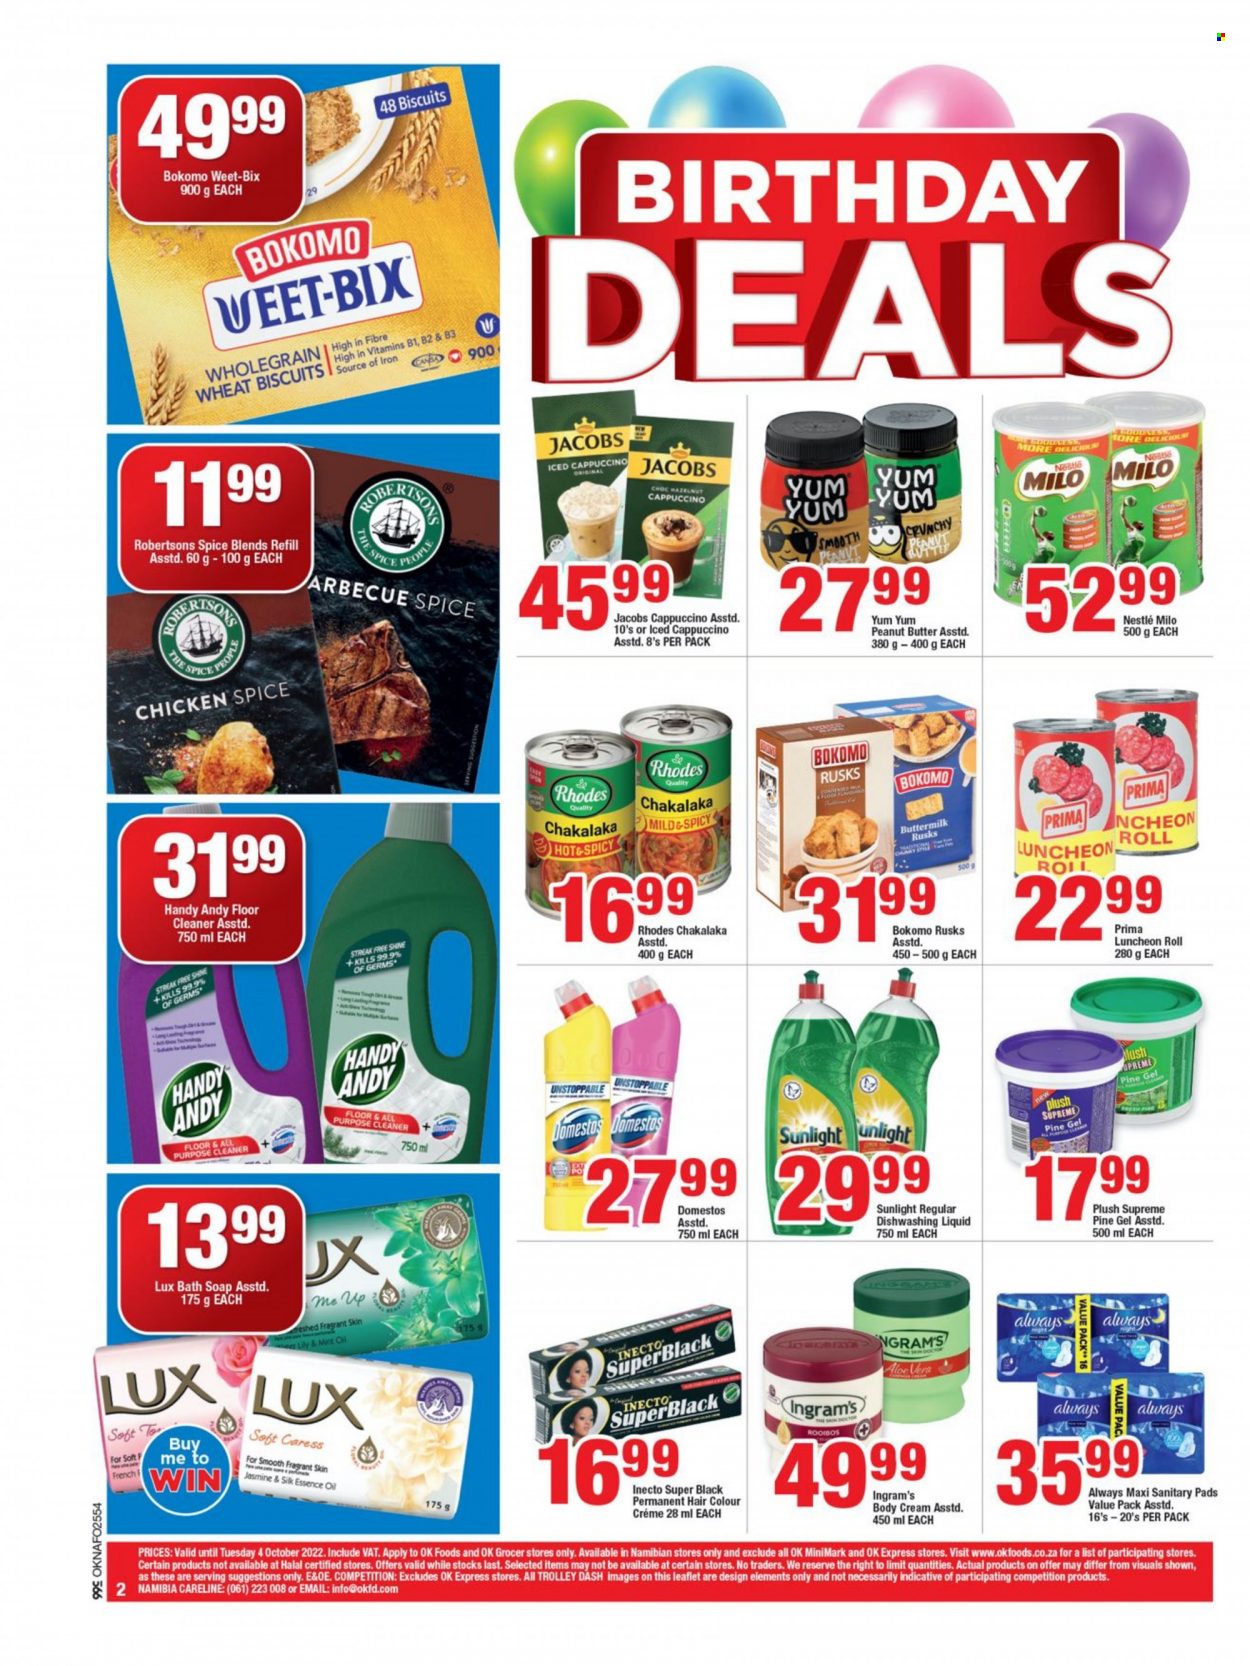 thumbnail - OK catalogue  - 29/09/2022 - 04/10/2022 - Sales products - rusks, cod, chakalaka, lunch meat, buttermilk, Milo, Silk, Nestlé, cereal bar, biscuit, Weet-Bix, spice, oil, rooibos tea, cappuccino, Jacobs. Page 2.